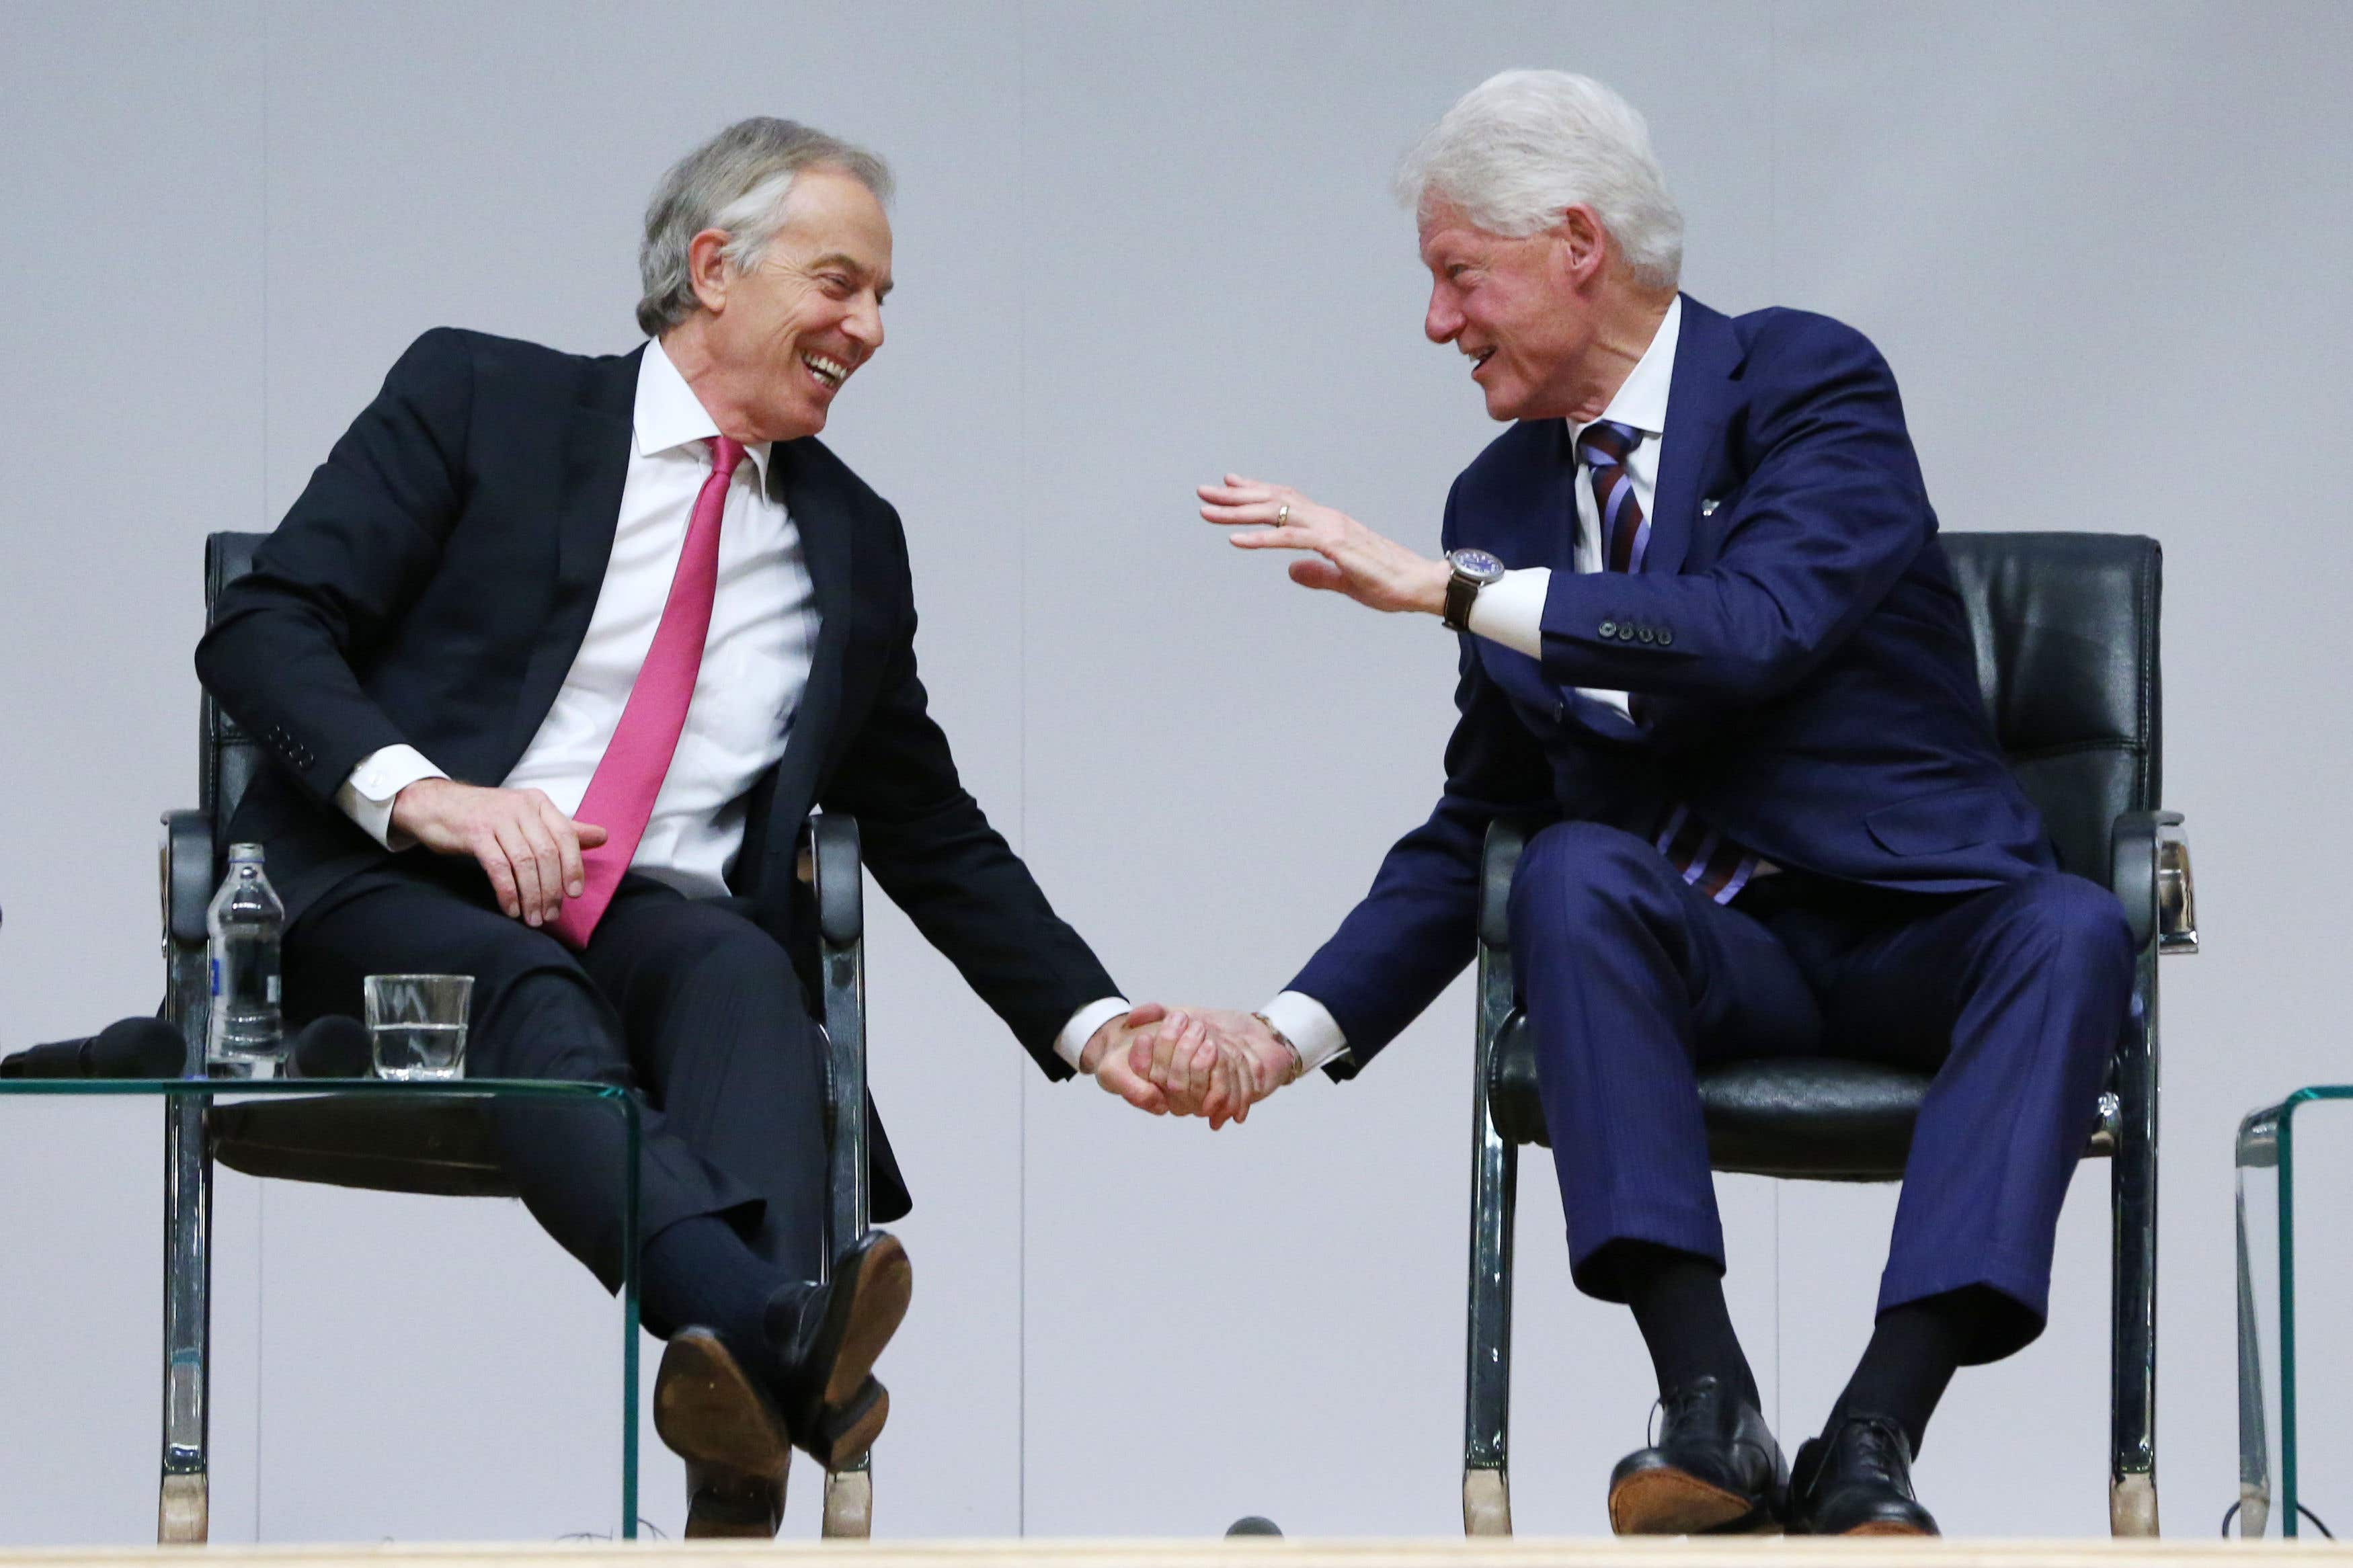 Sir Tony Blair and Bill Clinton mark the 20th anniversary of the Good Friday Agreement at Queen’s University in Belfast (PA)